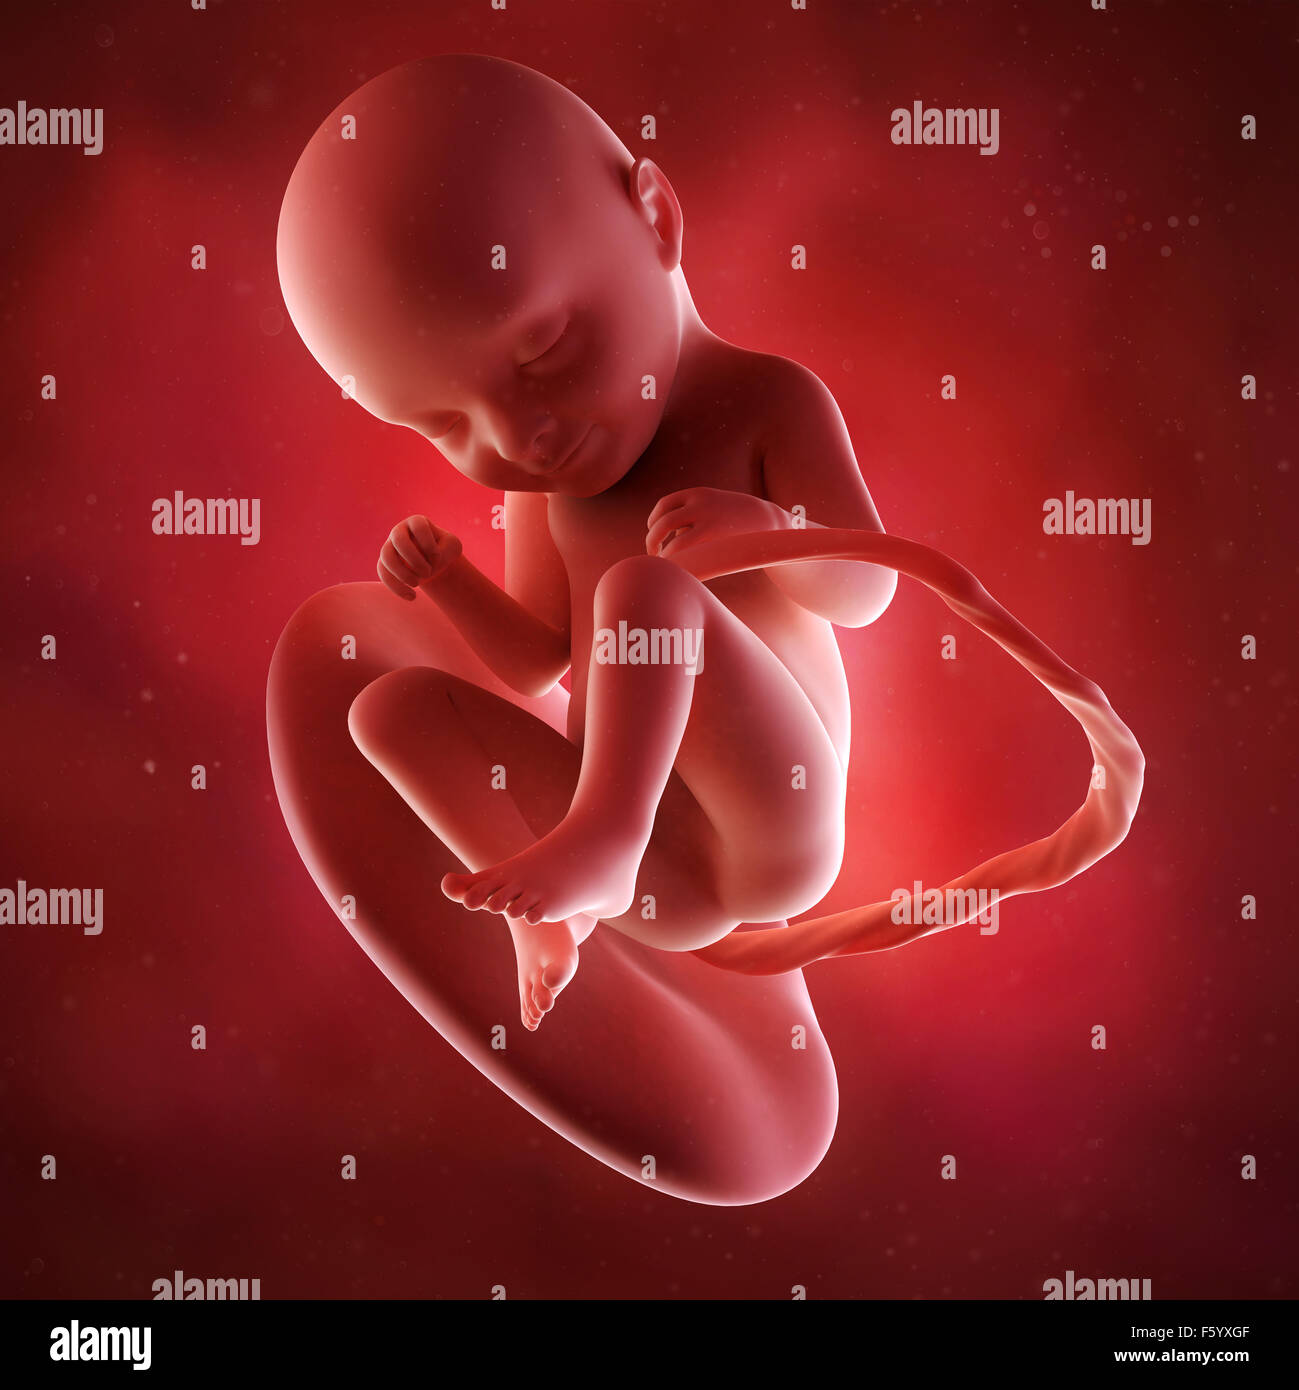 medical accurate 3d illustration of a fetus week 33 Stock Photo